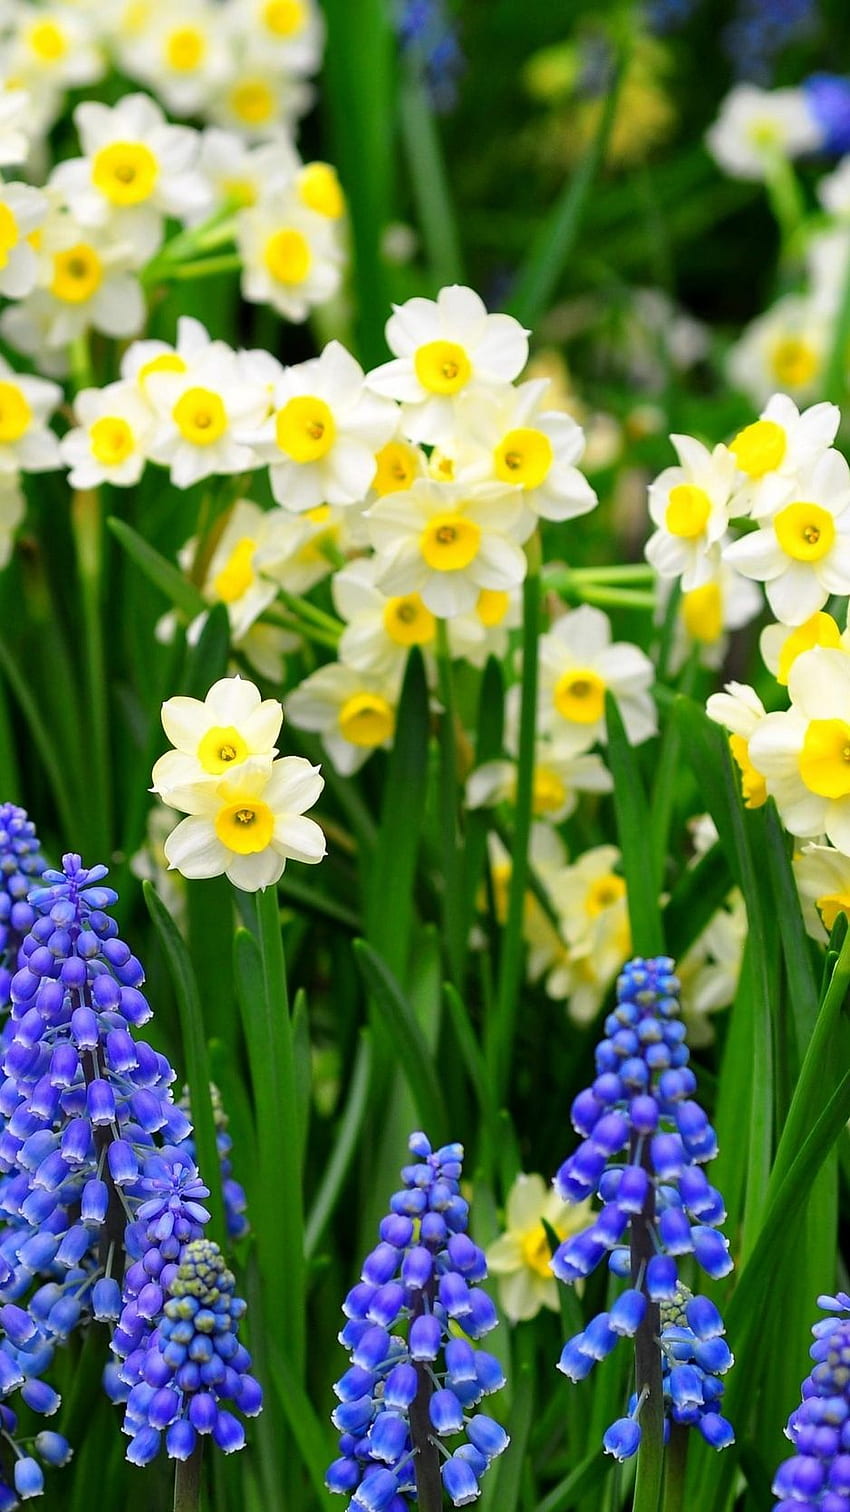 Nature Spring Wallpaper with Yellow Daffodils Flowers Stock Image  Image  of blogging nature 112619755